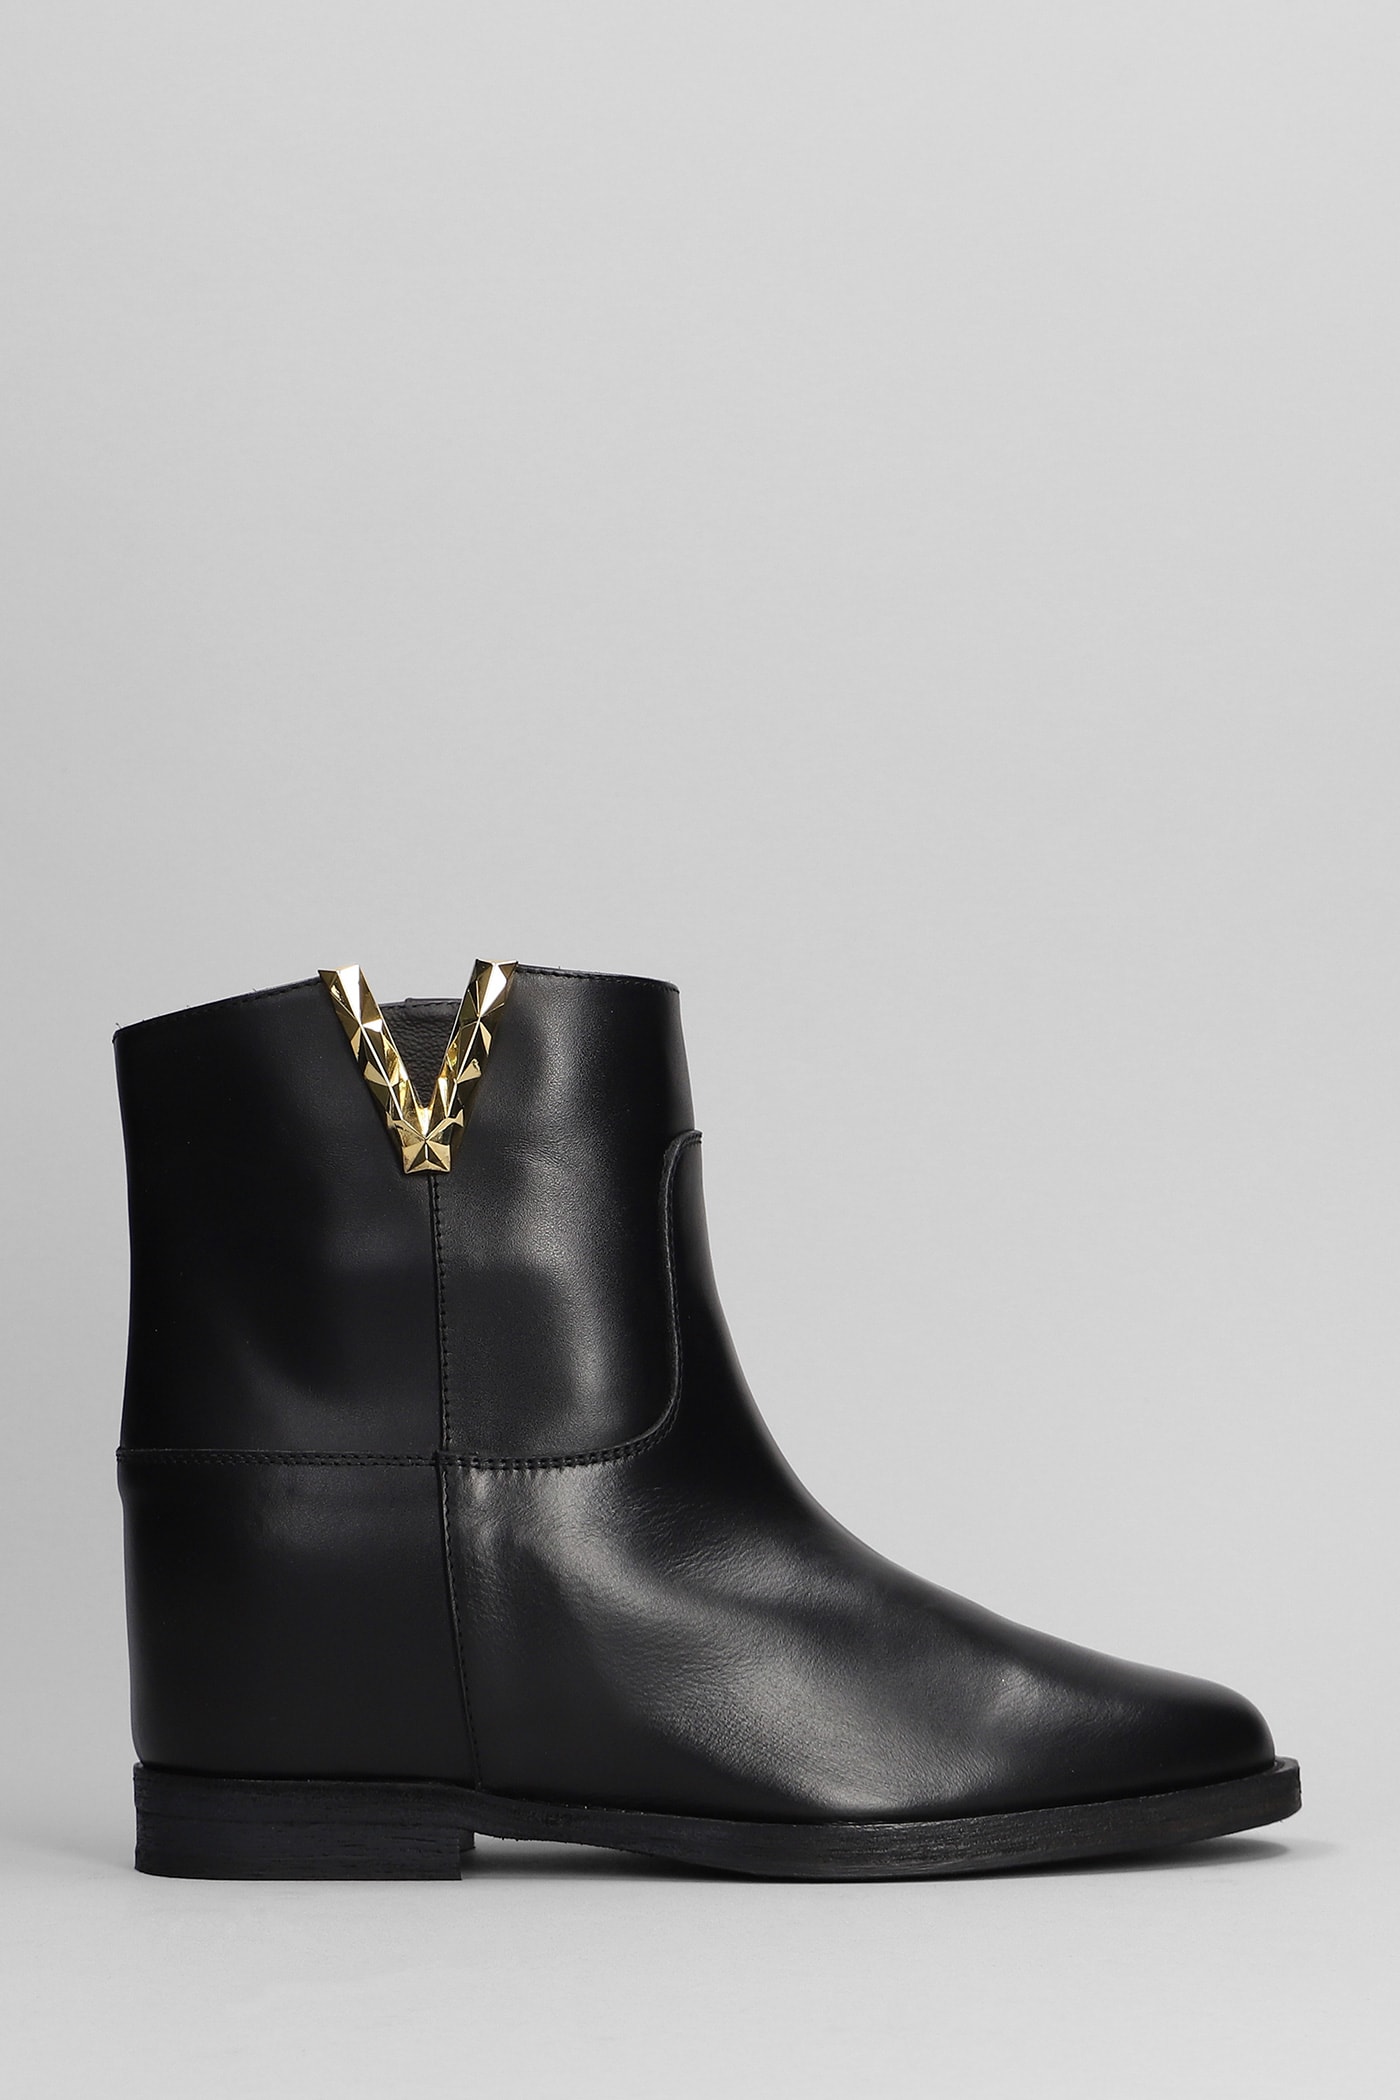 VIA ROMA 15 ANKLE BOOTS INSIDE WEDGE IN BLACK LEATHER